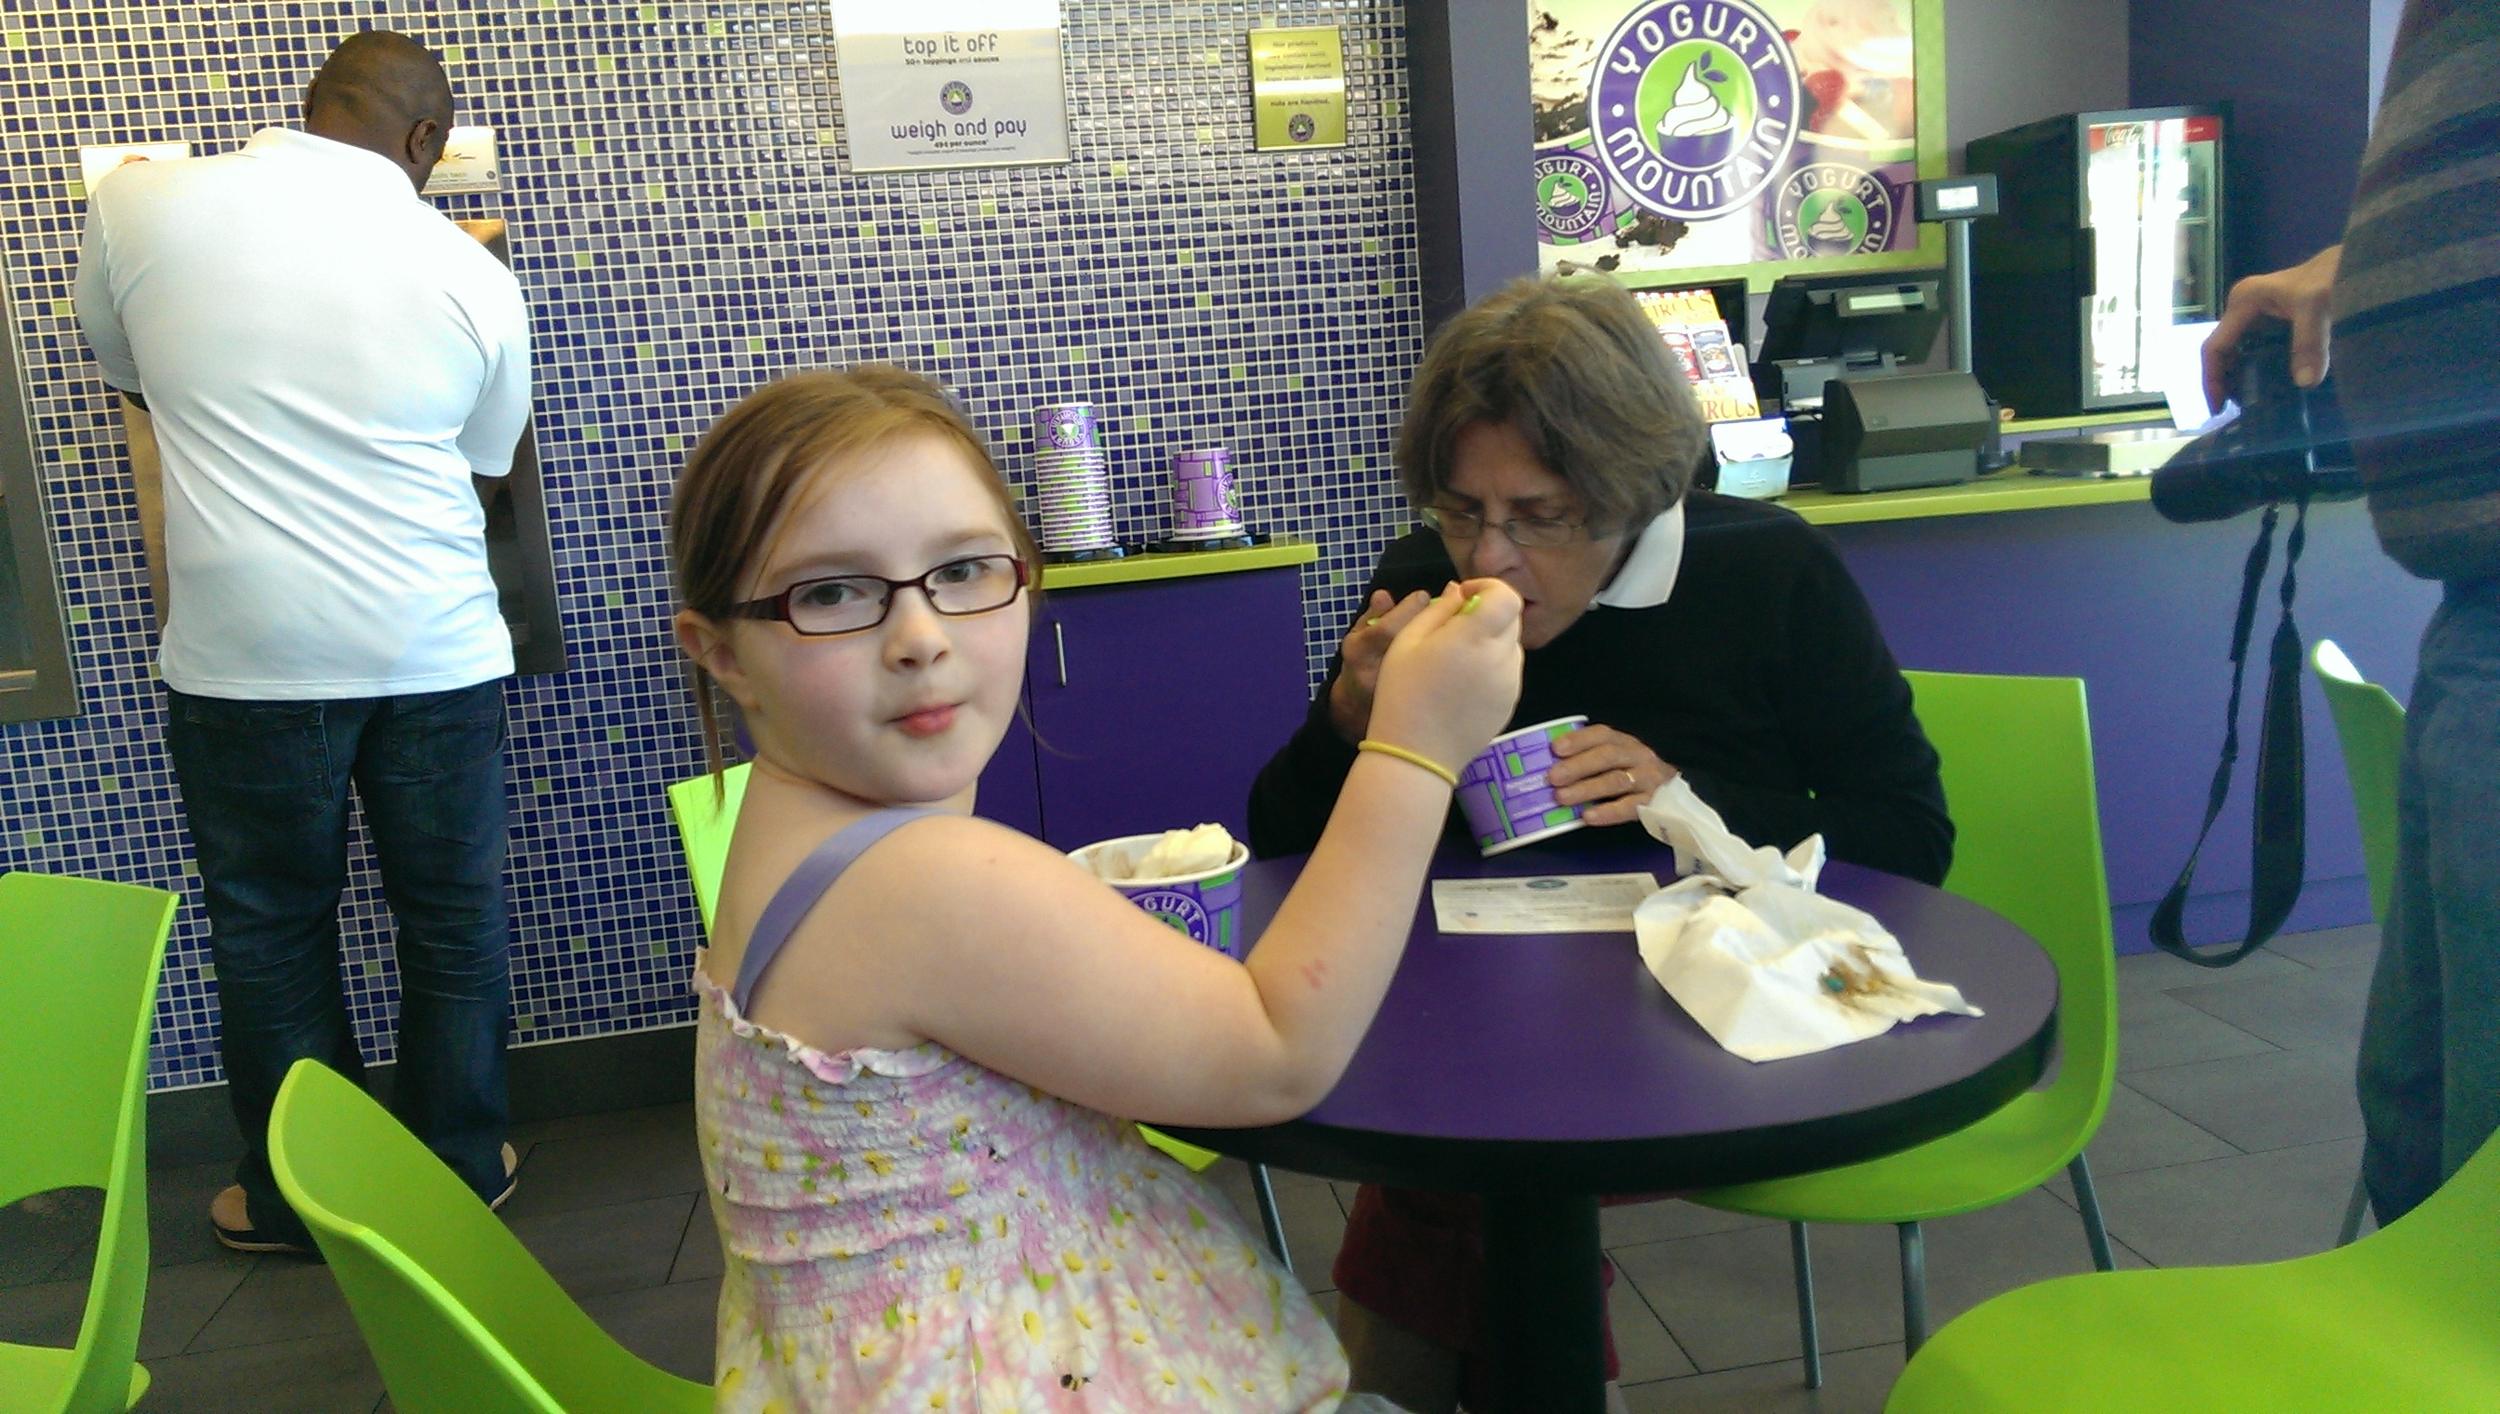 Introducing Nonni and Poppi to our favorite Fro Yo place. They approved! 